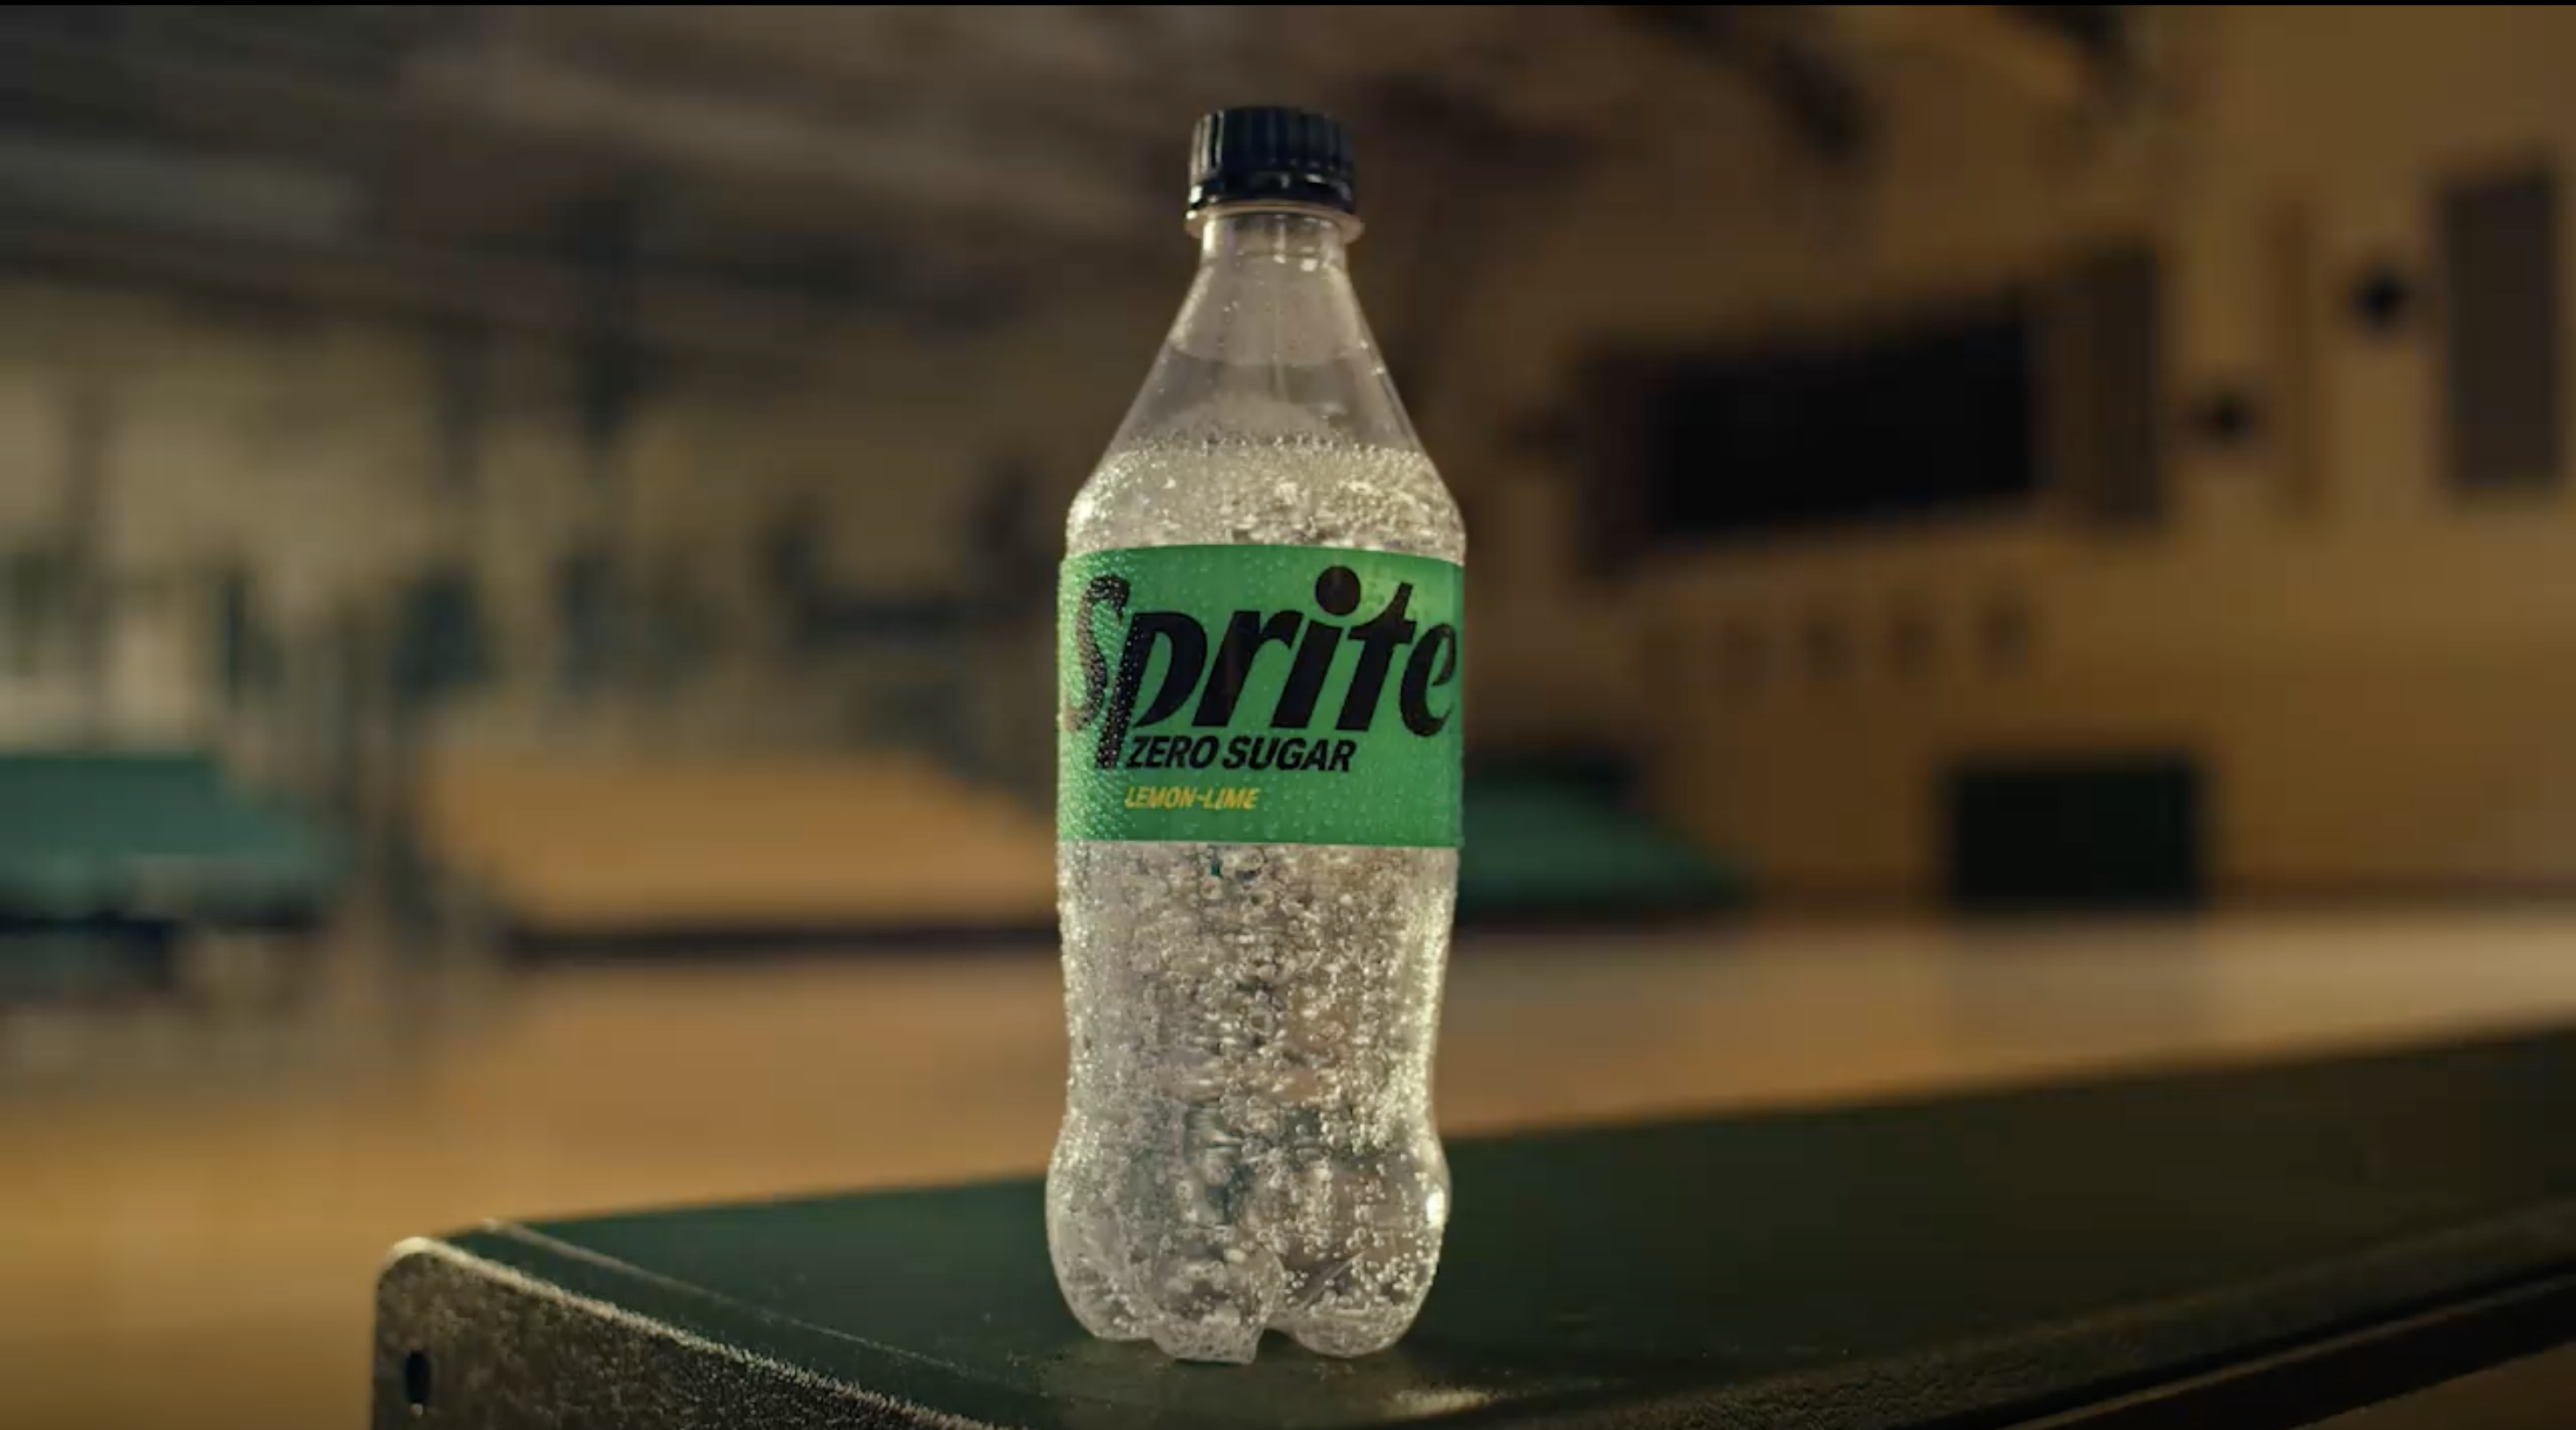 Bottle of sprite by a basketball court